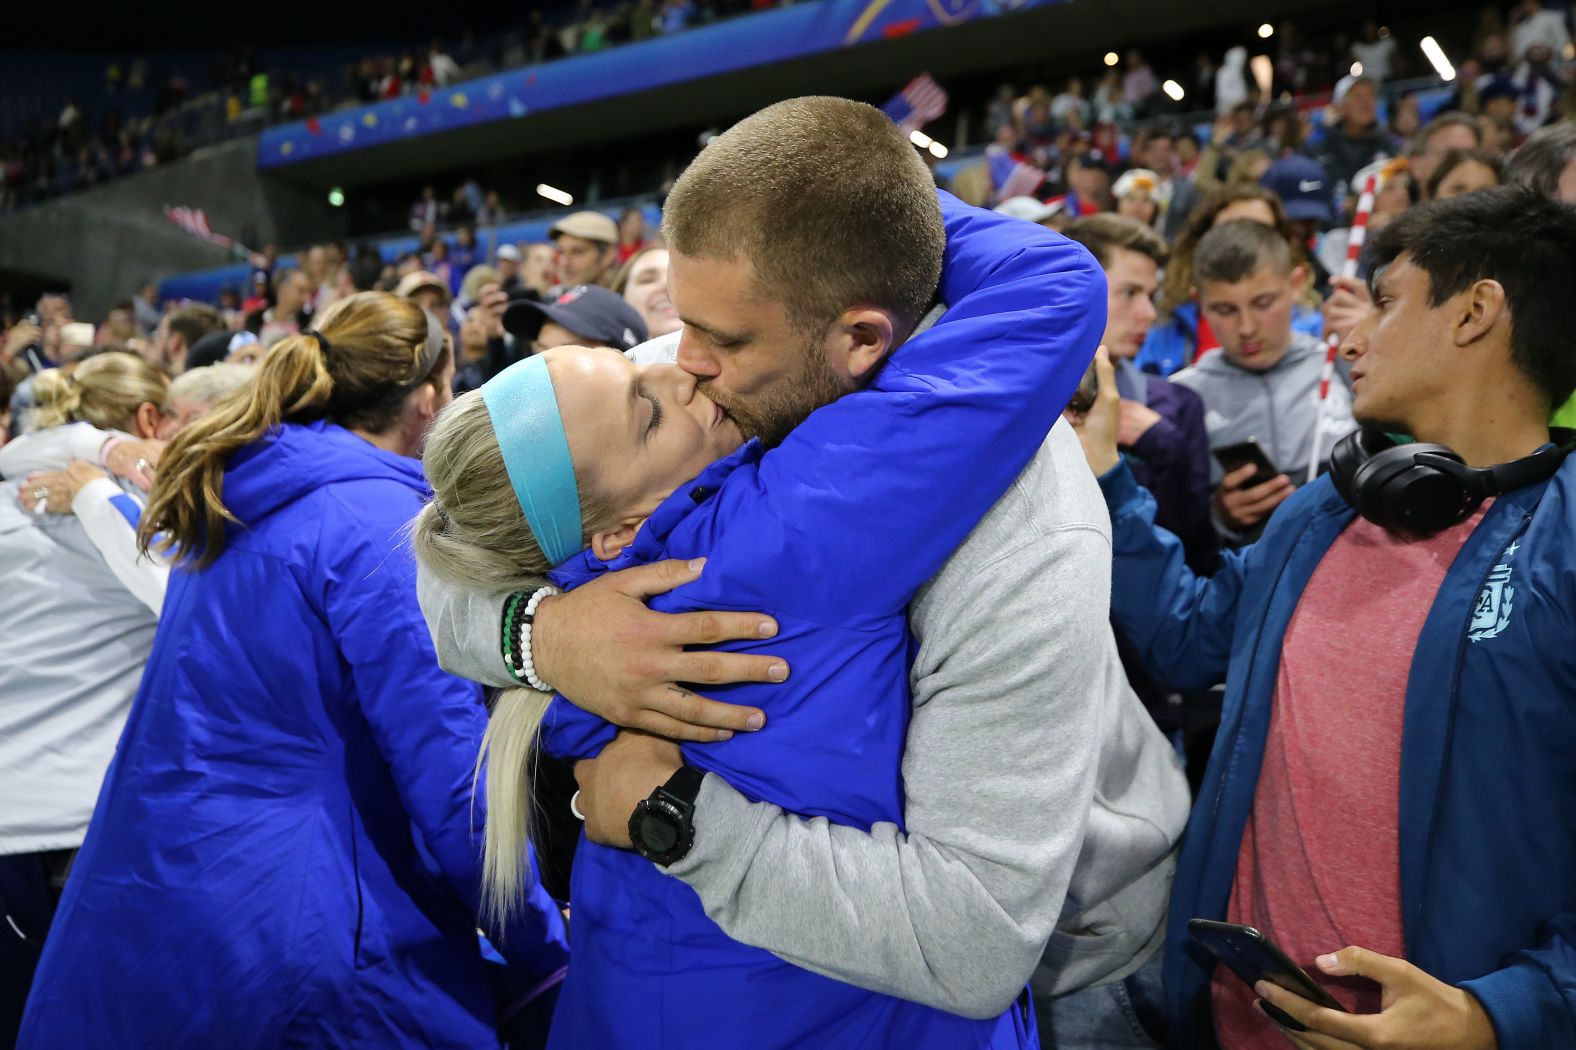 US midfielder Julie Ertz gets a kiss from her husband, NFL star Zach Ertz, after <a href="index.php?page=&url=https%3A%2F%2Fwww.cnn.com%2F2019%2F06%2F20%2Ffootball%2Fuswnt-sweden-womens-world-cup-spt-int%2Findex.html" target="_blank">the Americans defeated Sweden 2-0</a> in the final match of the group stage.